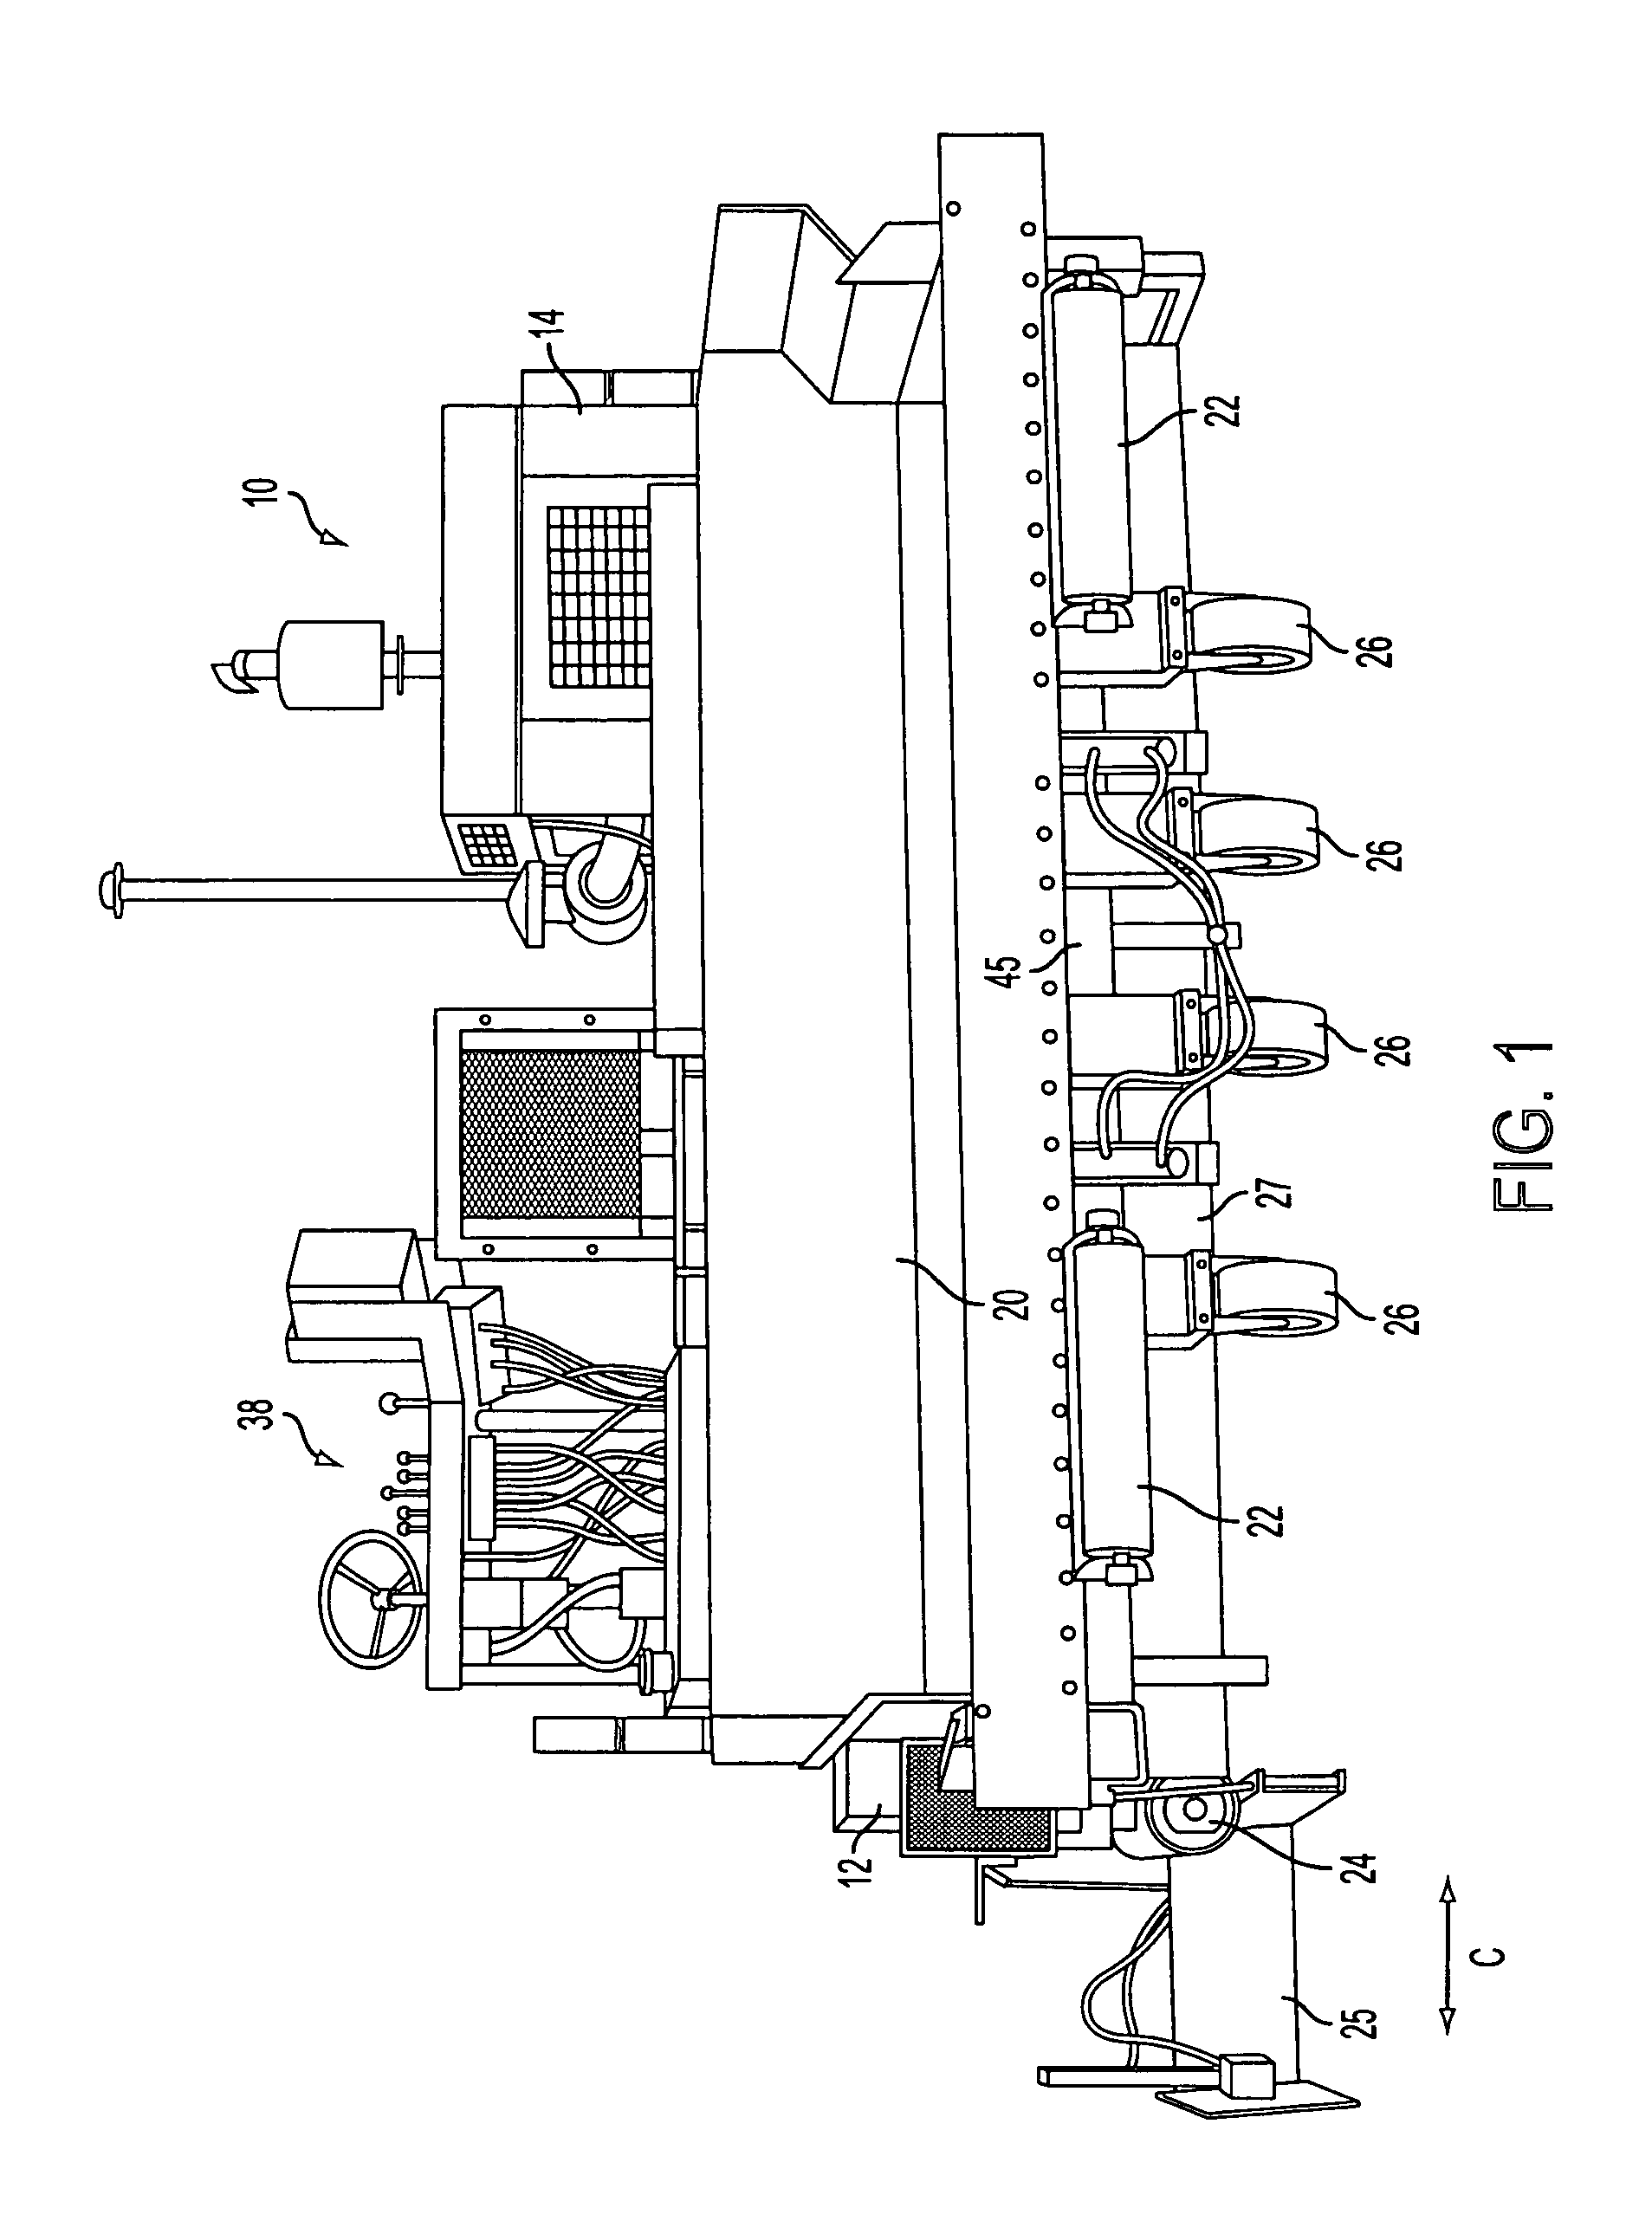 Apparatus for spreading aggregate material on a road berm